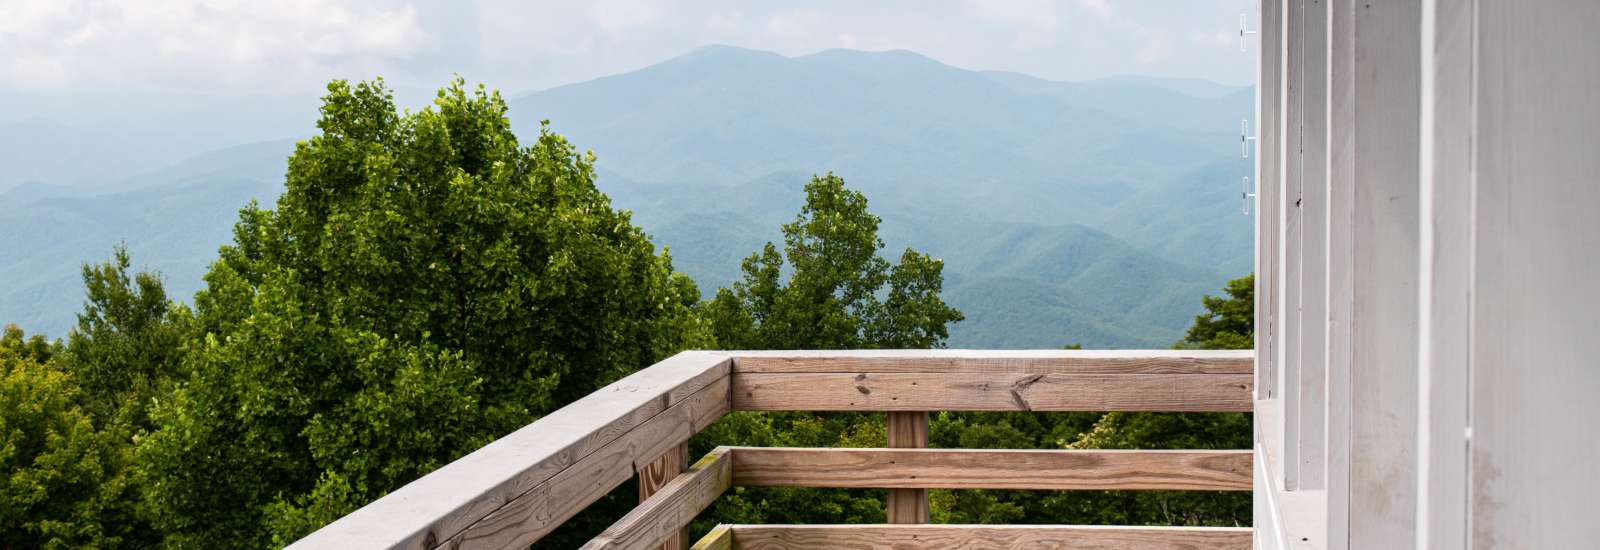 View from the Rich Mountain Fire Tower near Asheville, NC